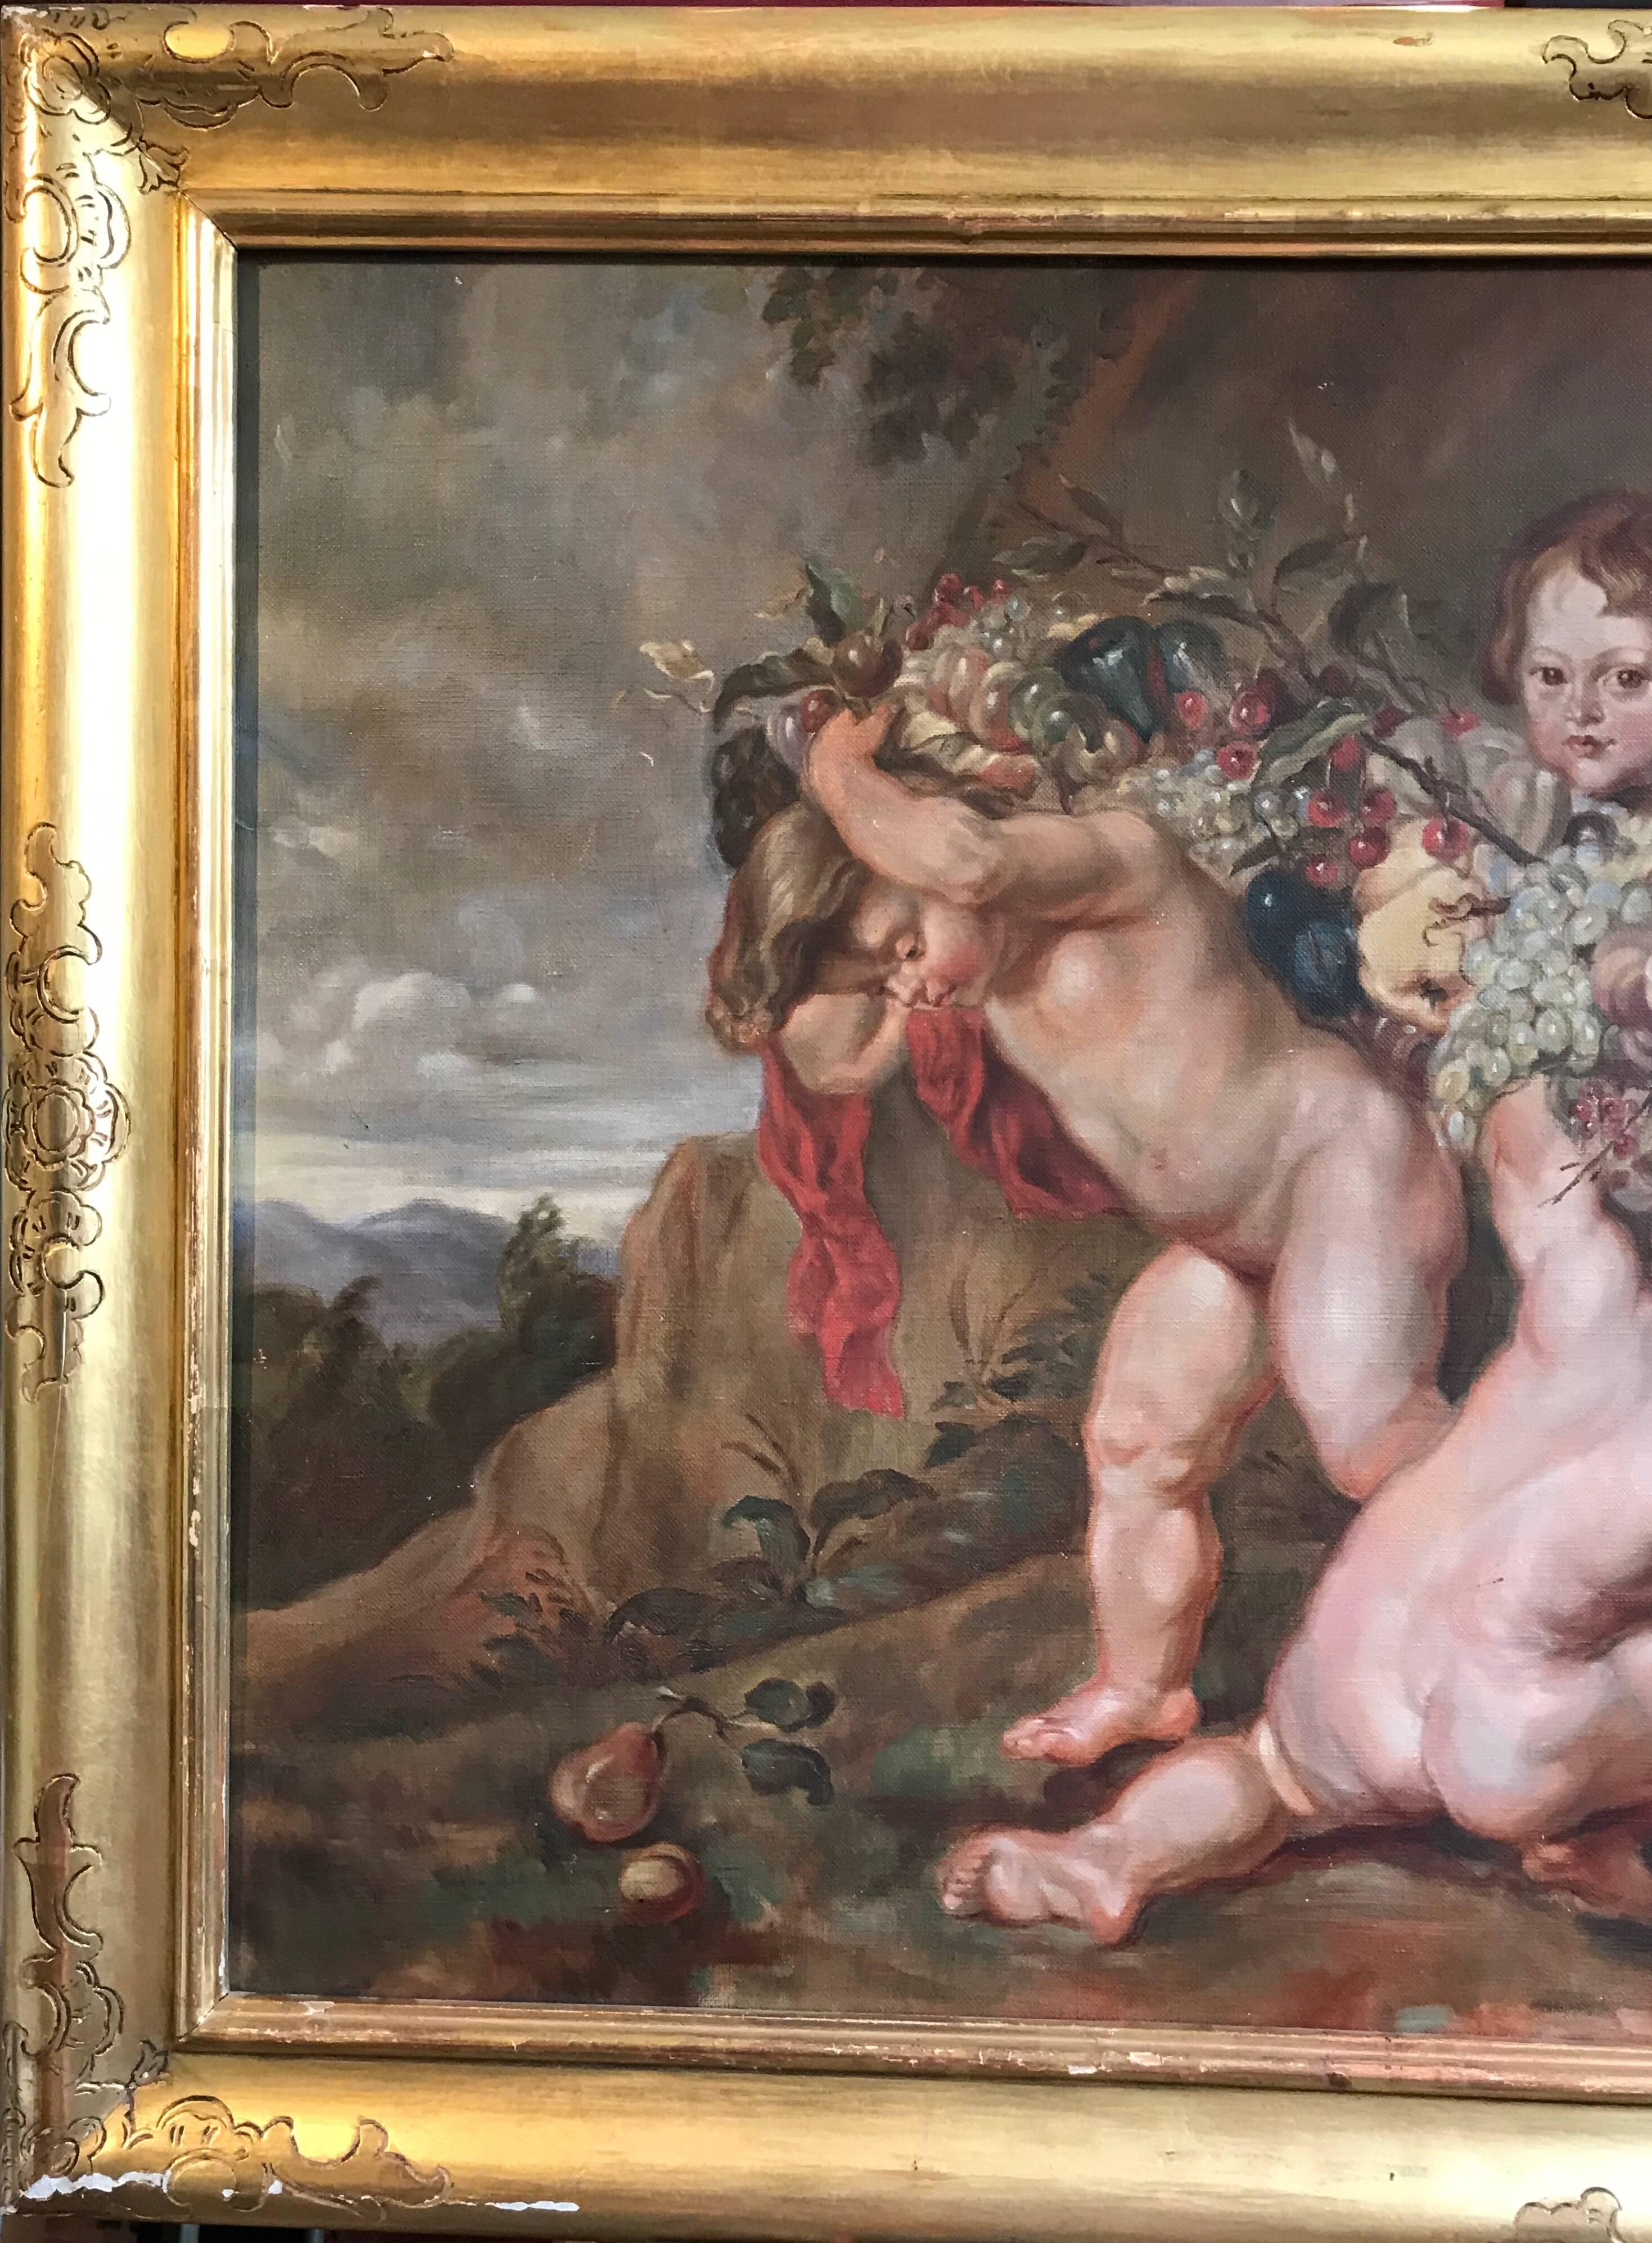 Bacchanal Cupids Playing
French School, early 1900's
oil painting on canvas, framed

canvas: 22 x 39 inches
framed: 27 x 44 inches

Large scale French Rococo style oil painting on canvas, dating to the early 1900's period. The work depicts these